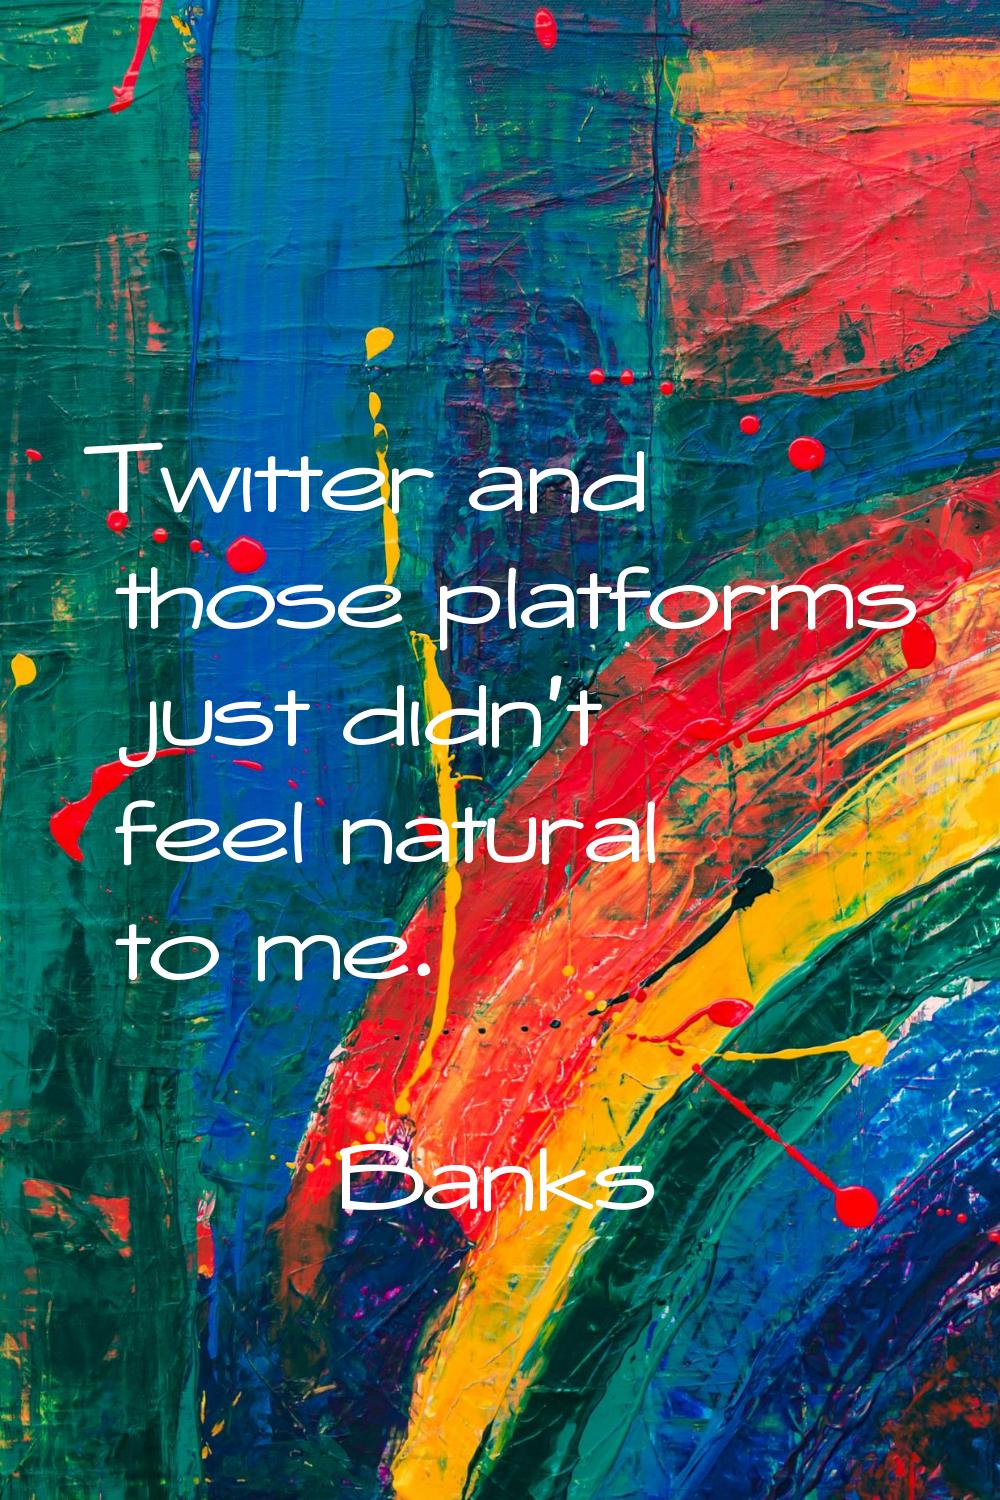 Twitter and those platforms just didn't feel natural to me.